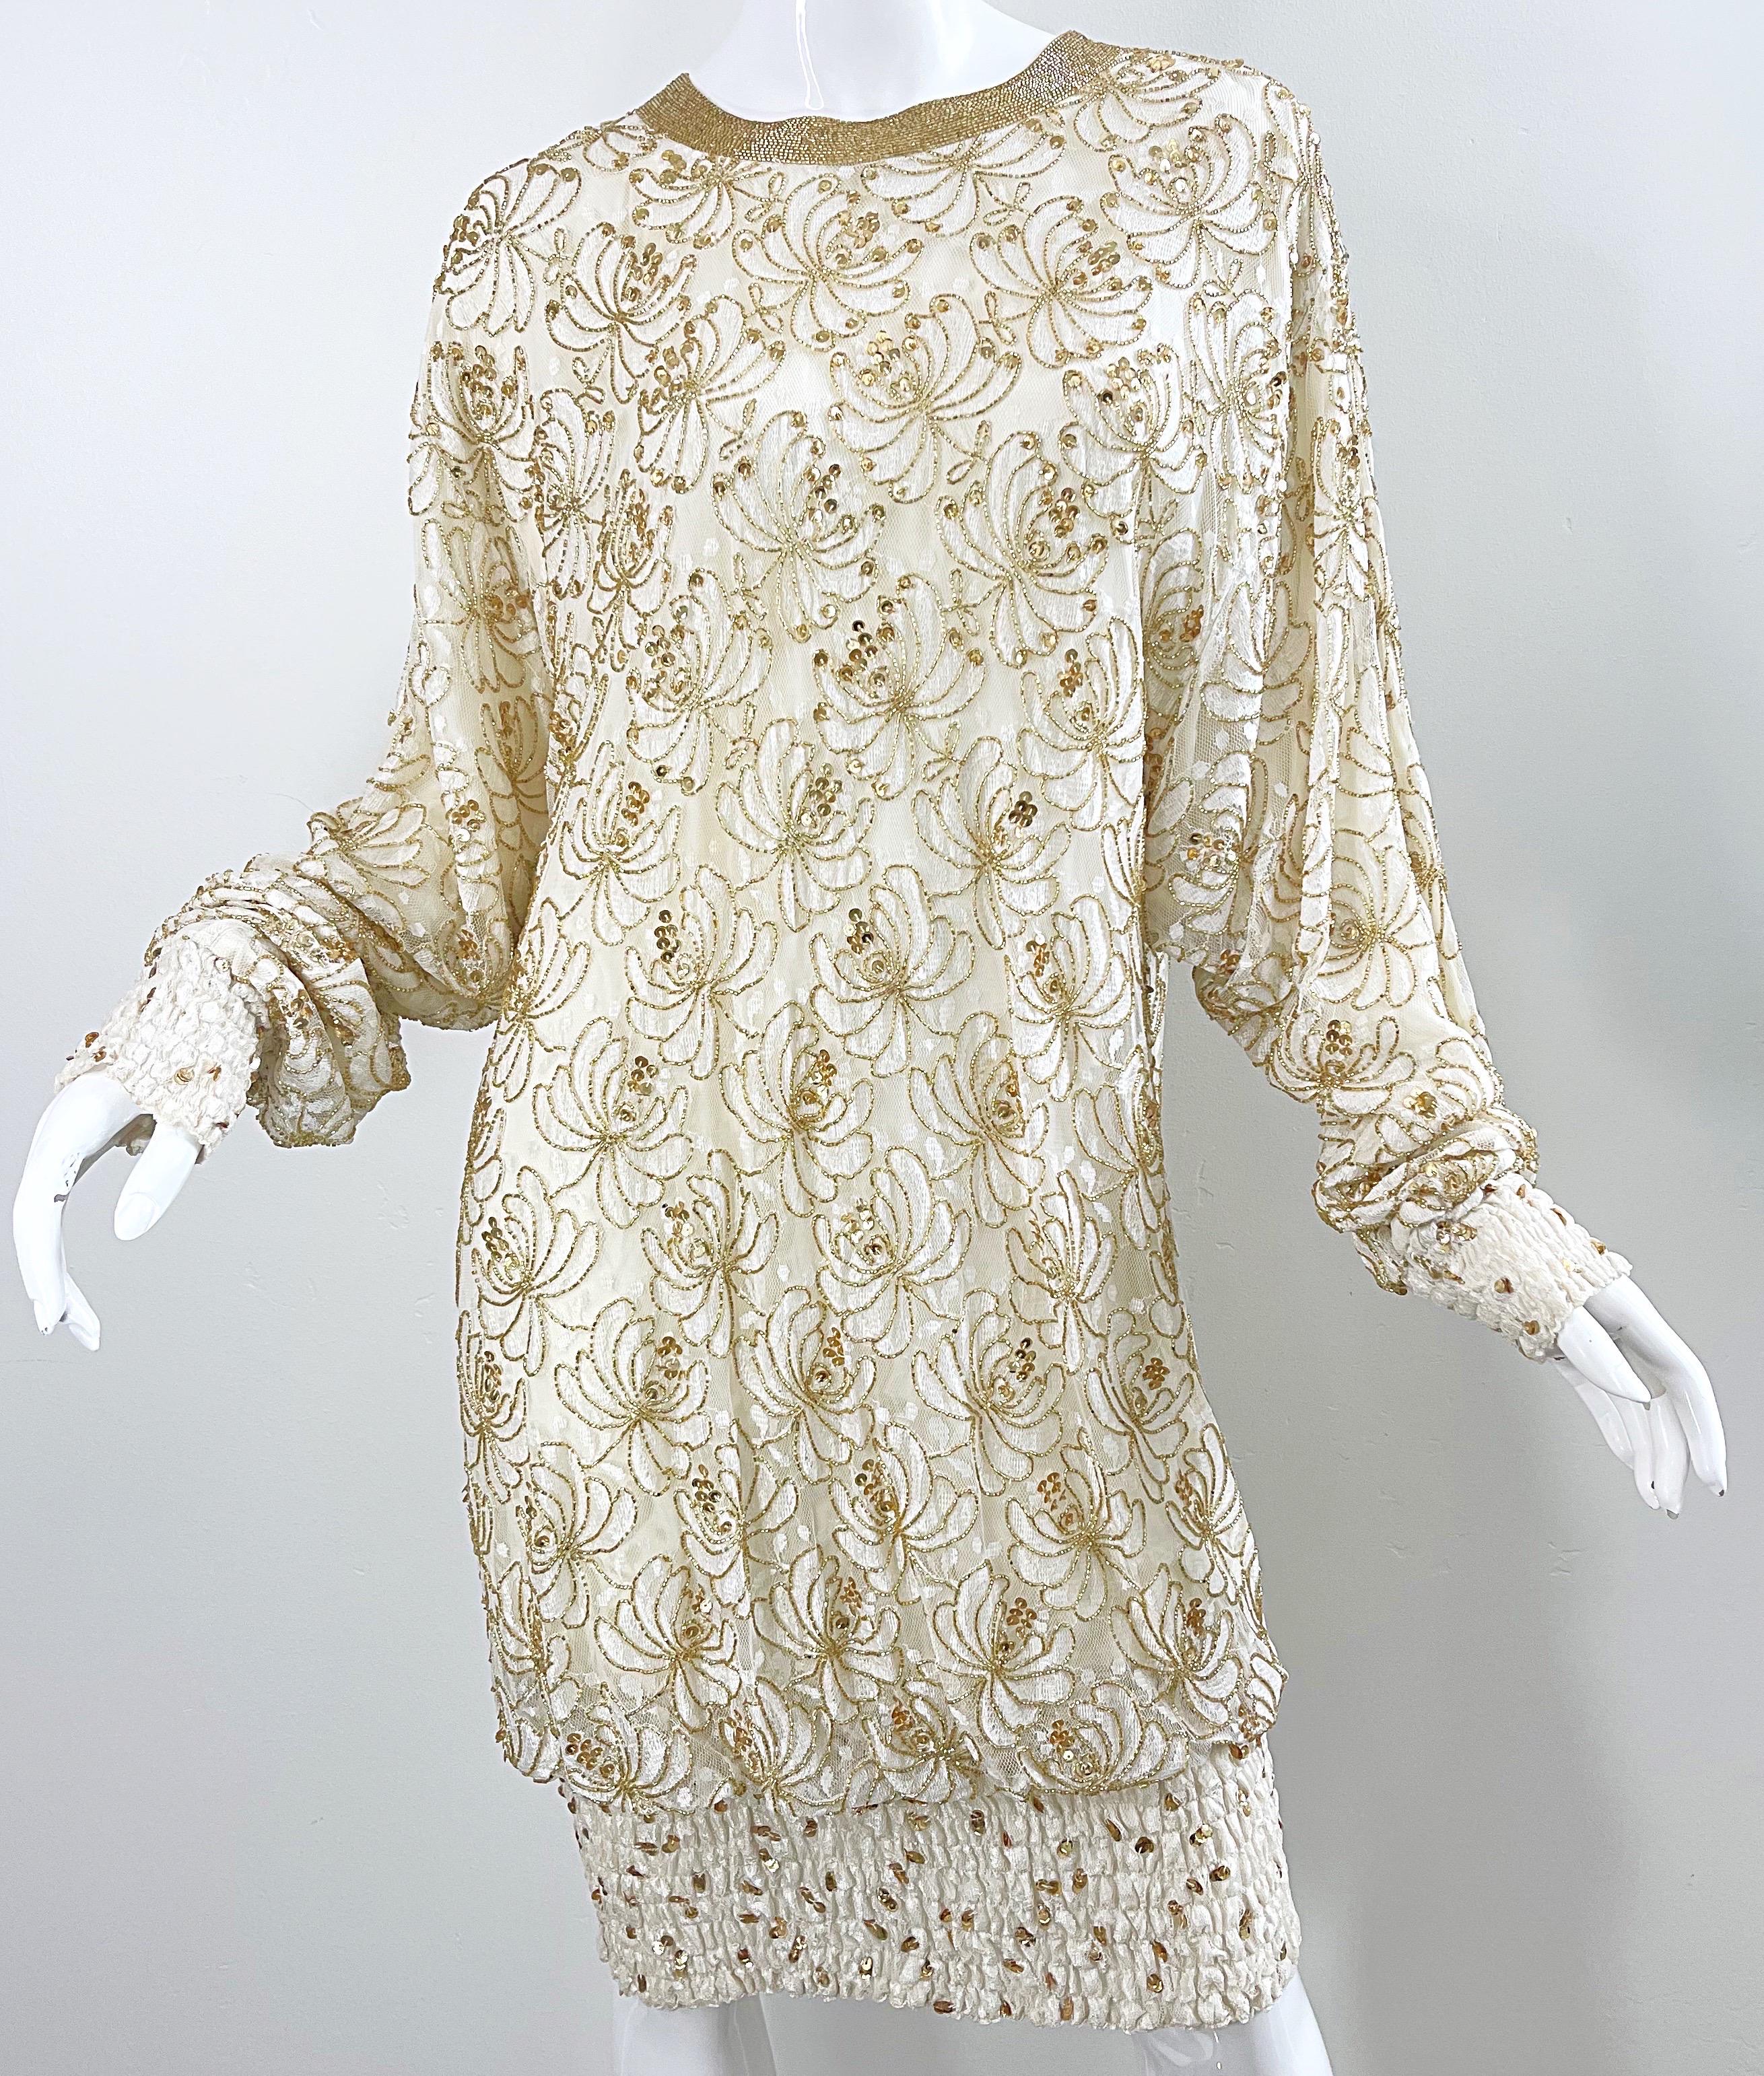 Lillie Rubin 1980s Ivory Off White + Gold Lace Sequin Beaded Vintage 80s Dress For Sale 8